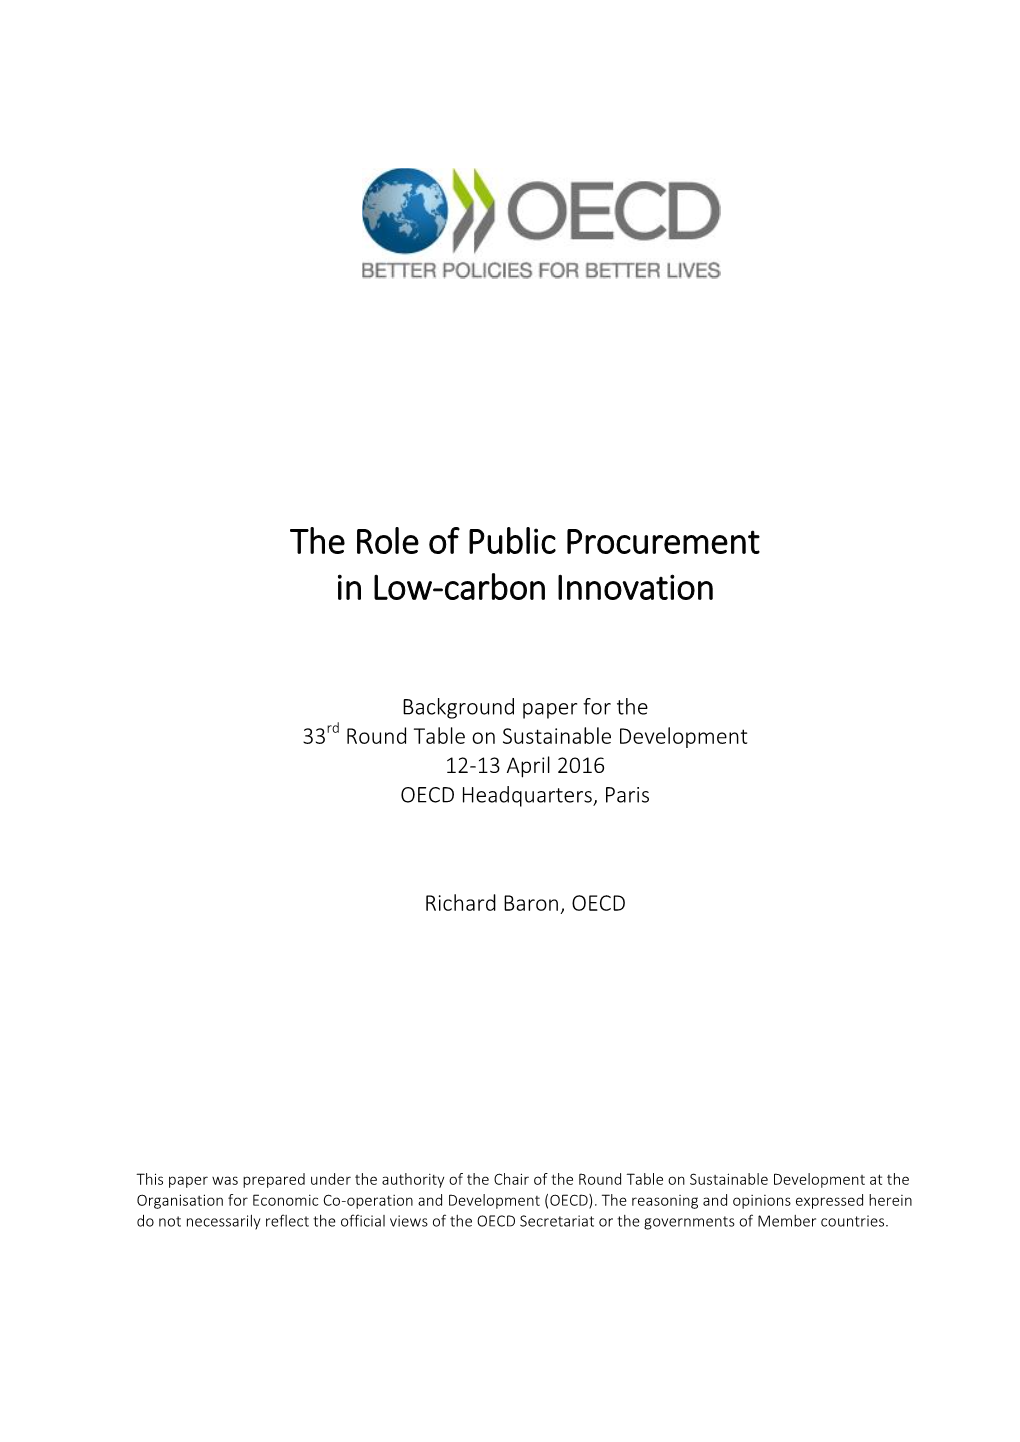 The Role of Public Procurement in Low-Carbon Innovation